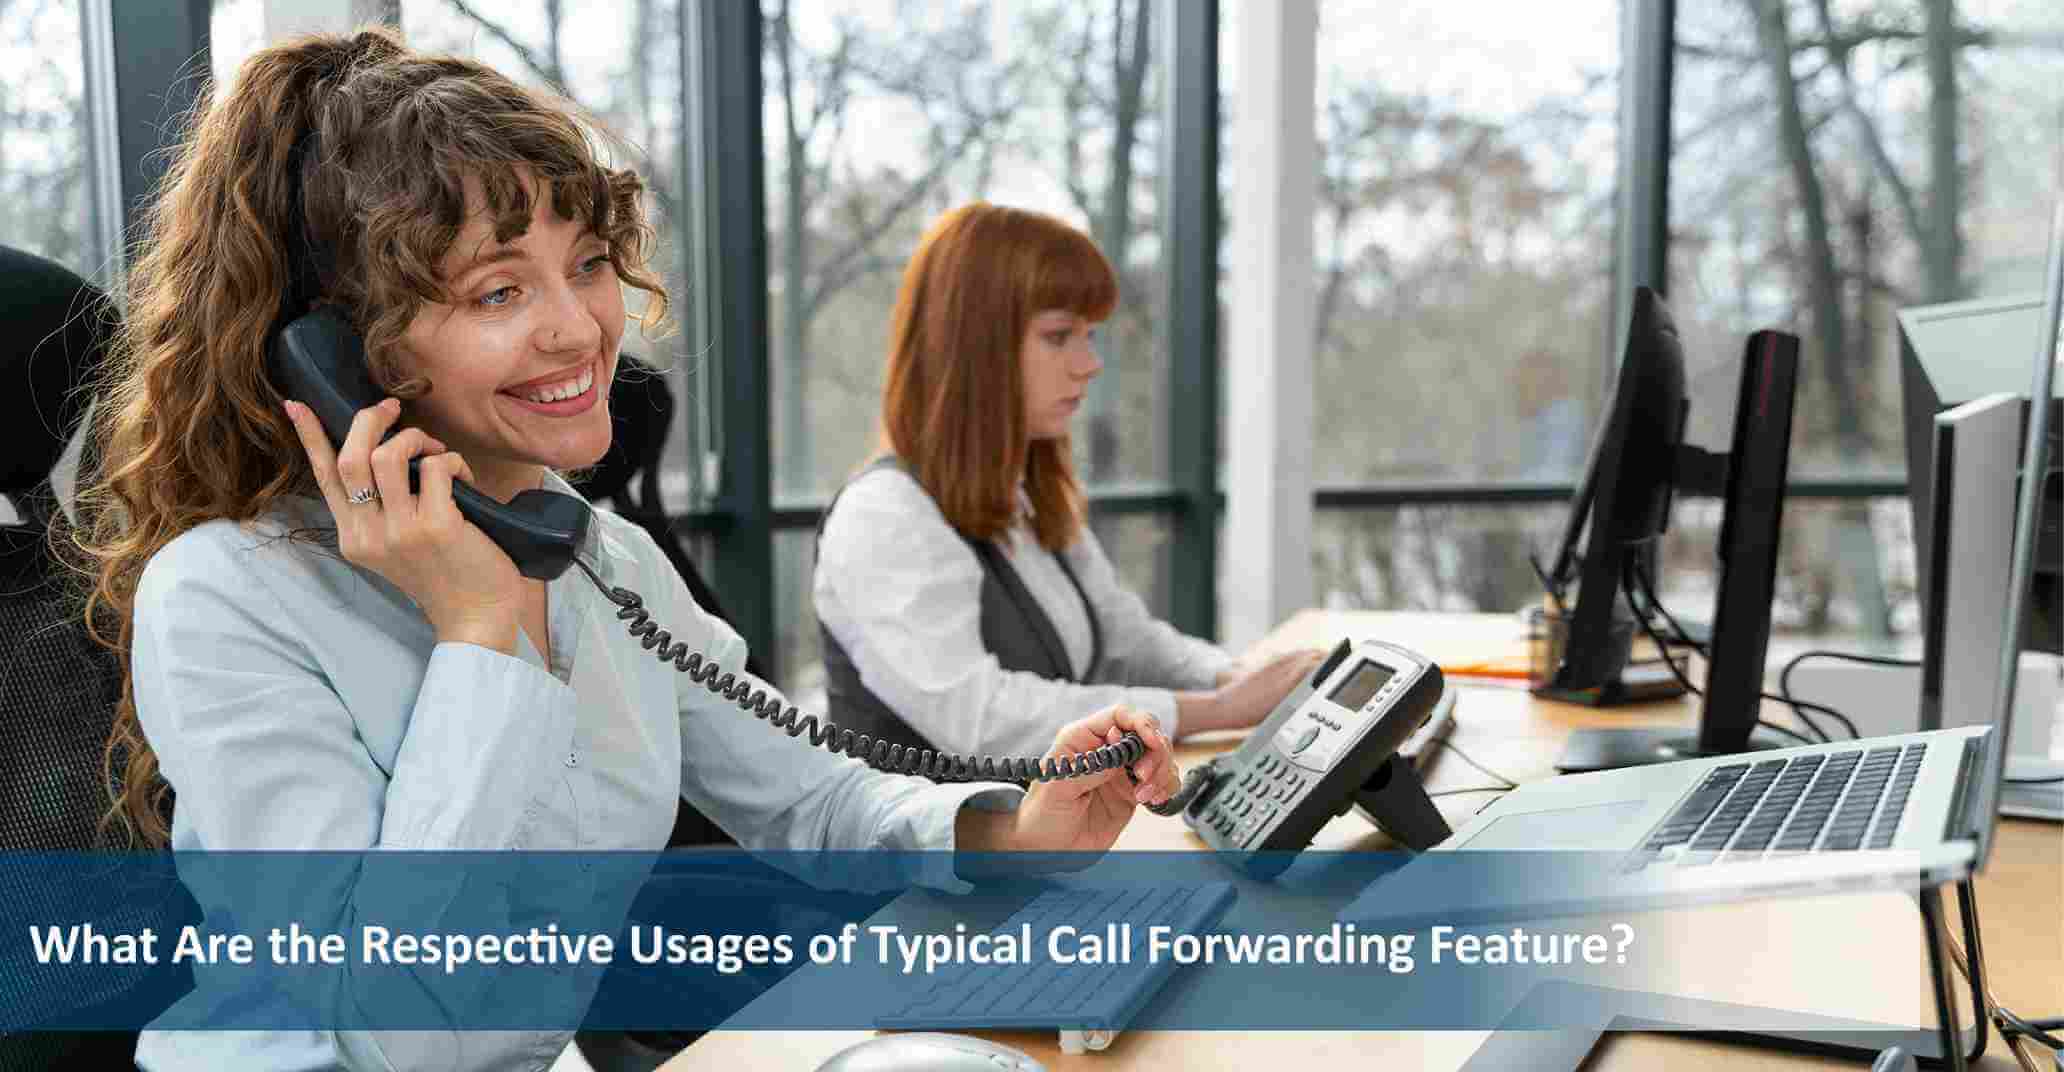 What Are the Respective Usages of Typical Call Forwarding Feature?